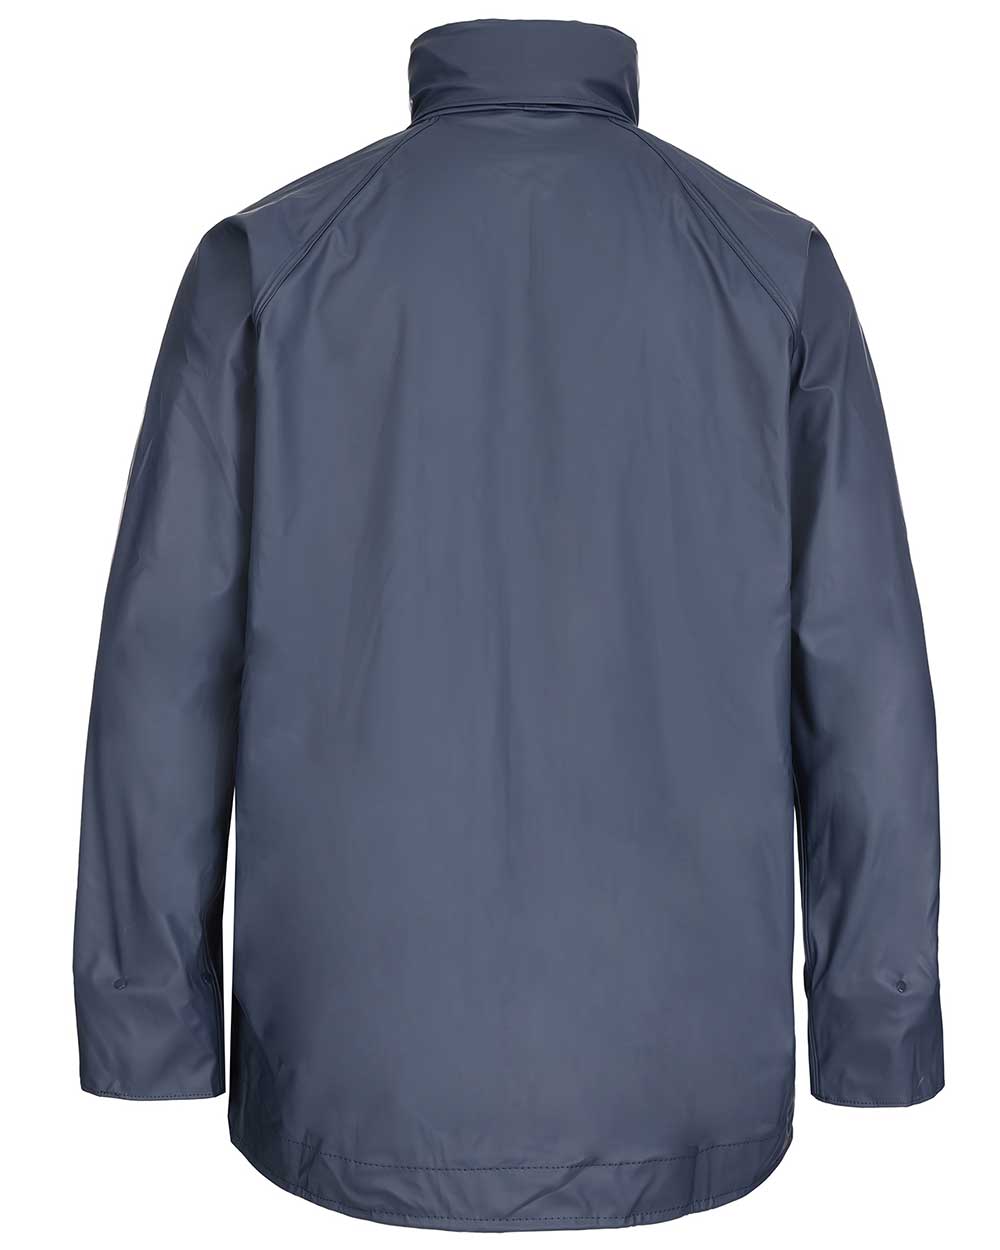 Back view Fort Airflex Fortex Breathable Waterproof Jacket in Navy 